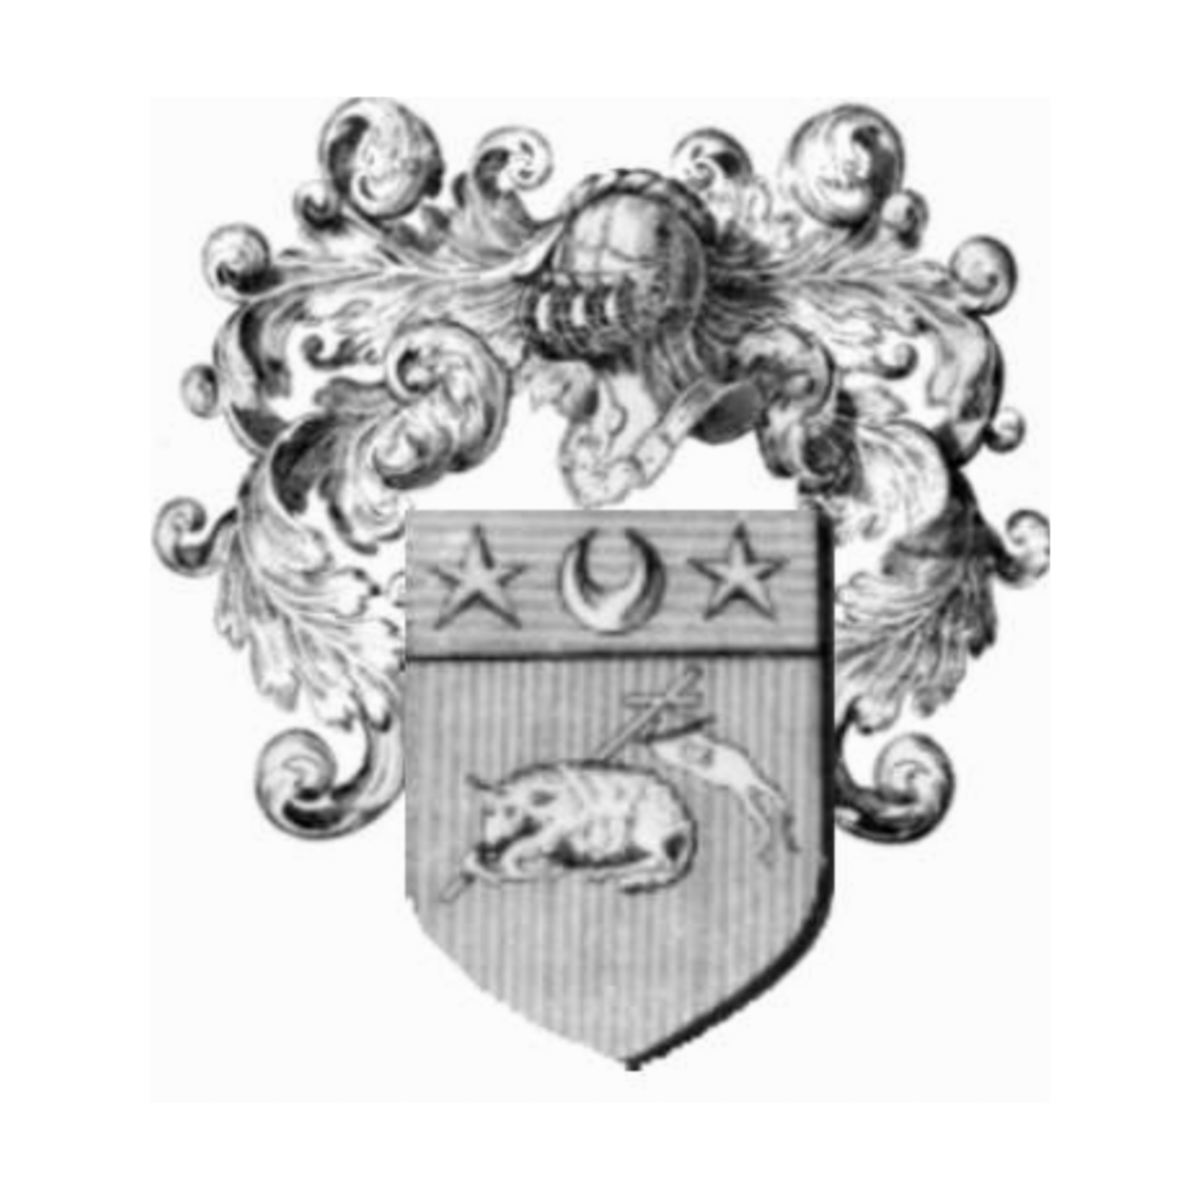 Coat of arms of family Pascual